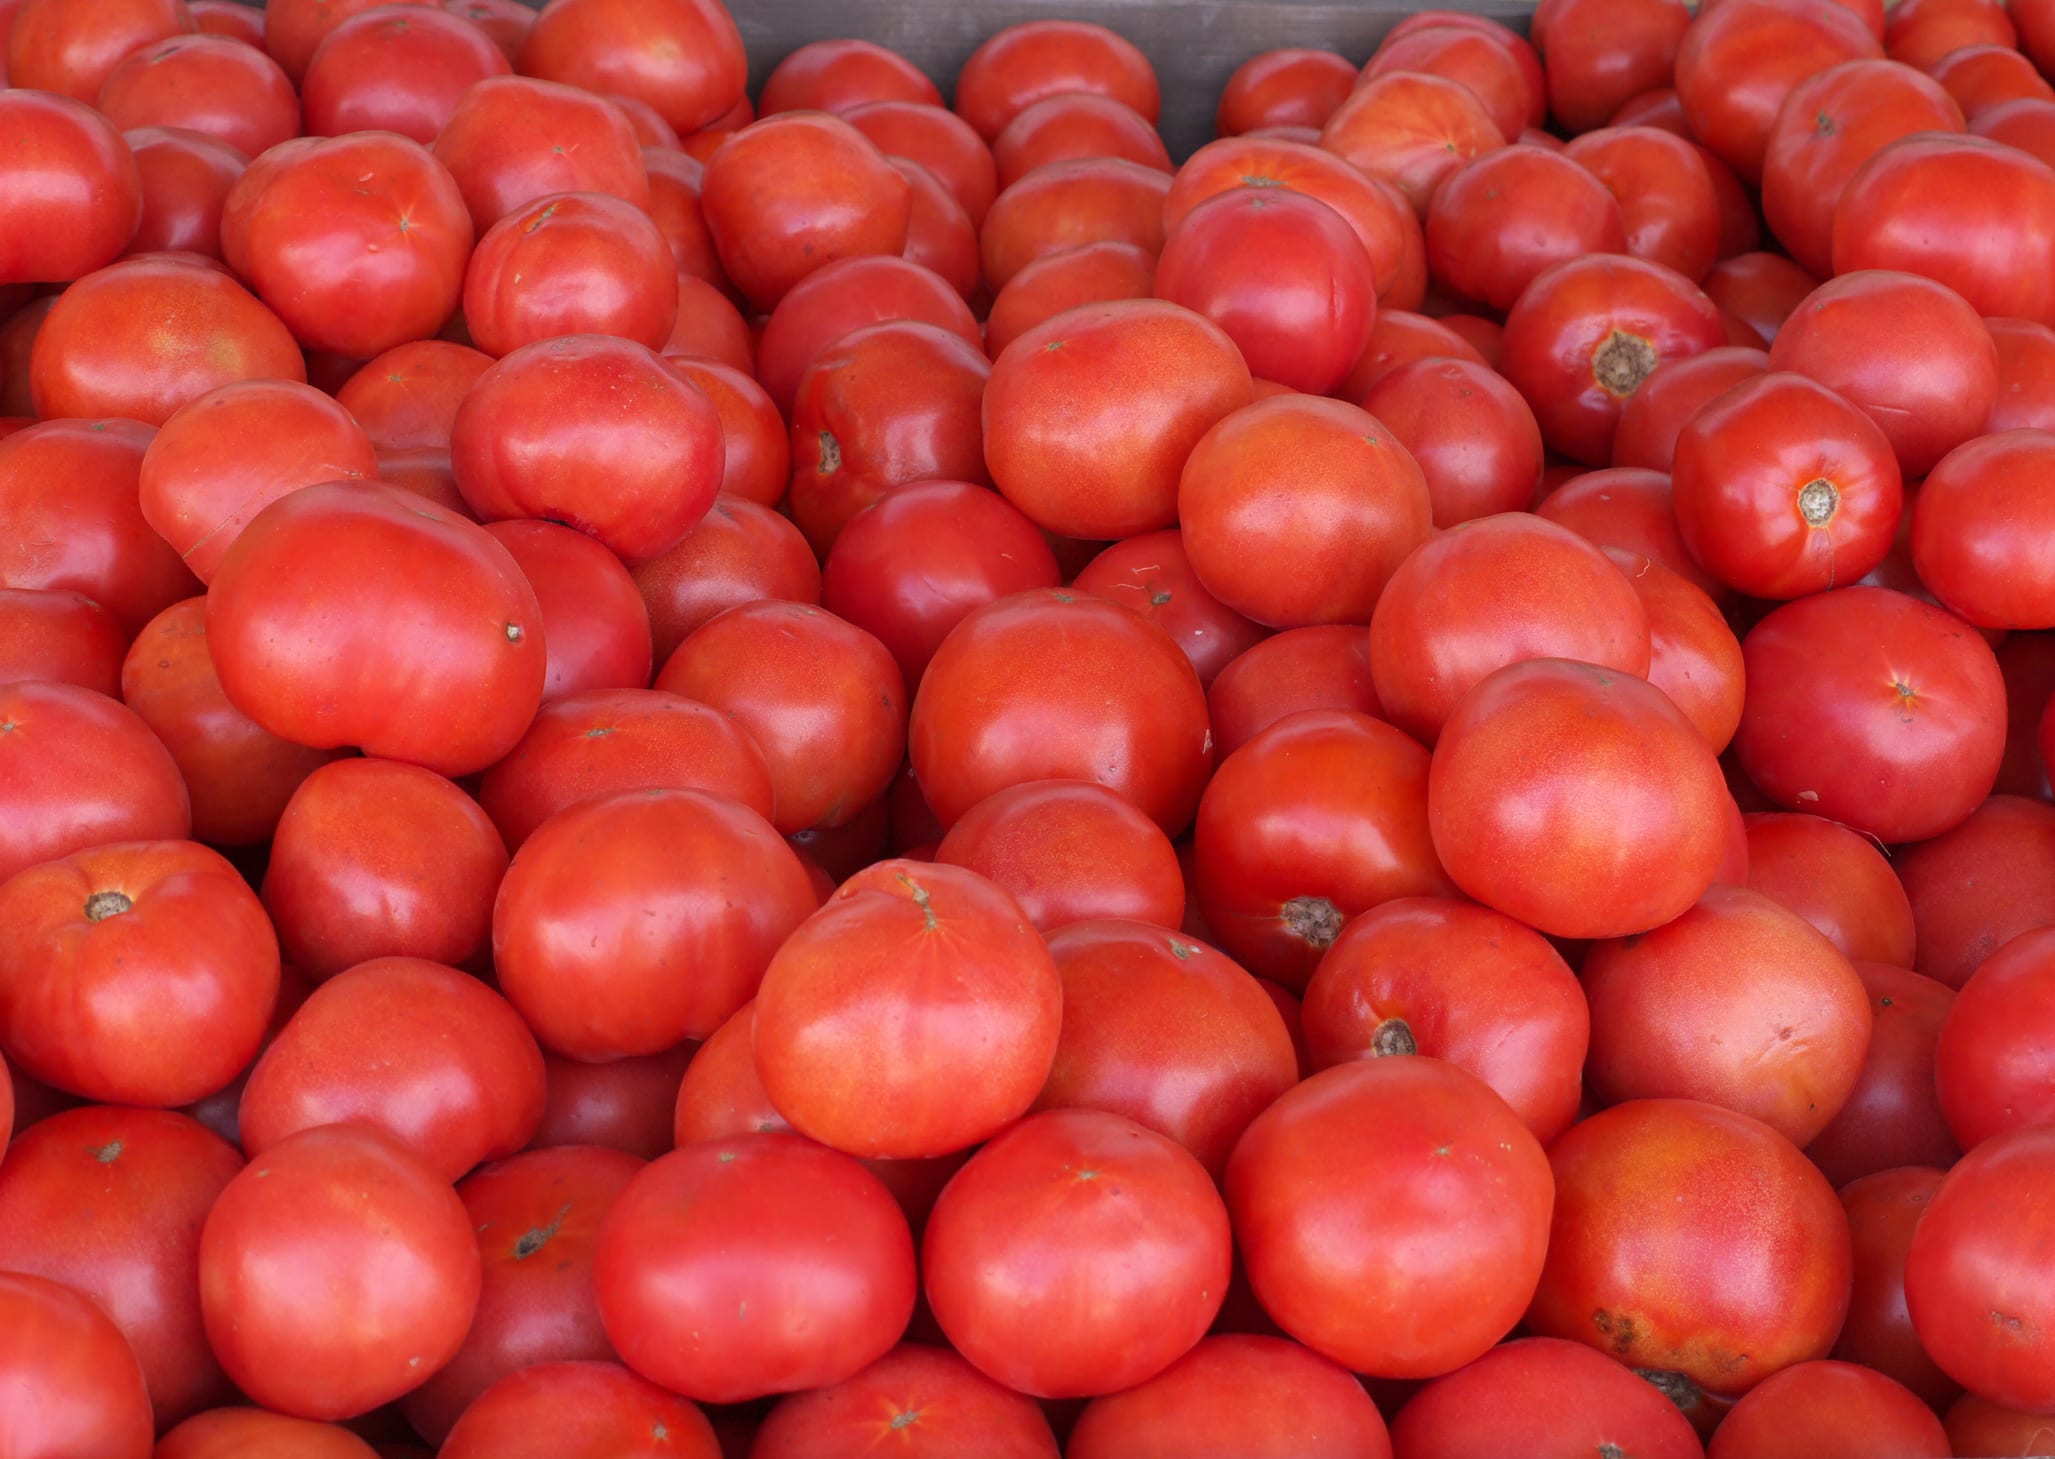 Tomatoes at open market